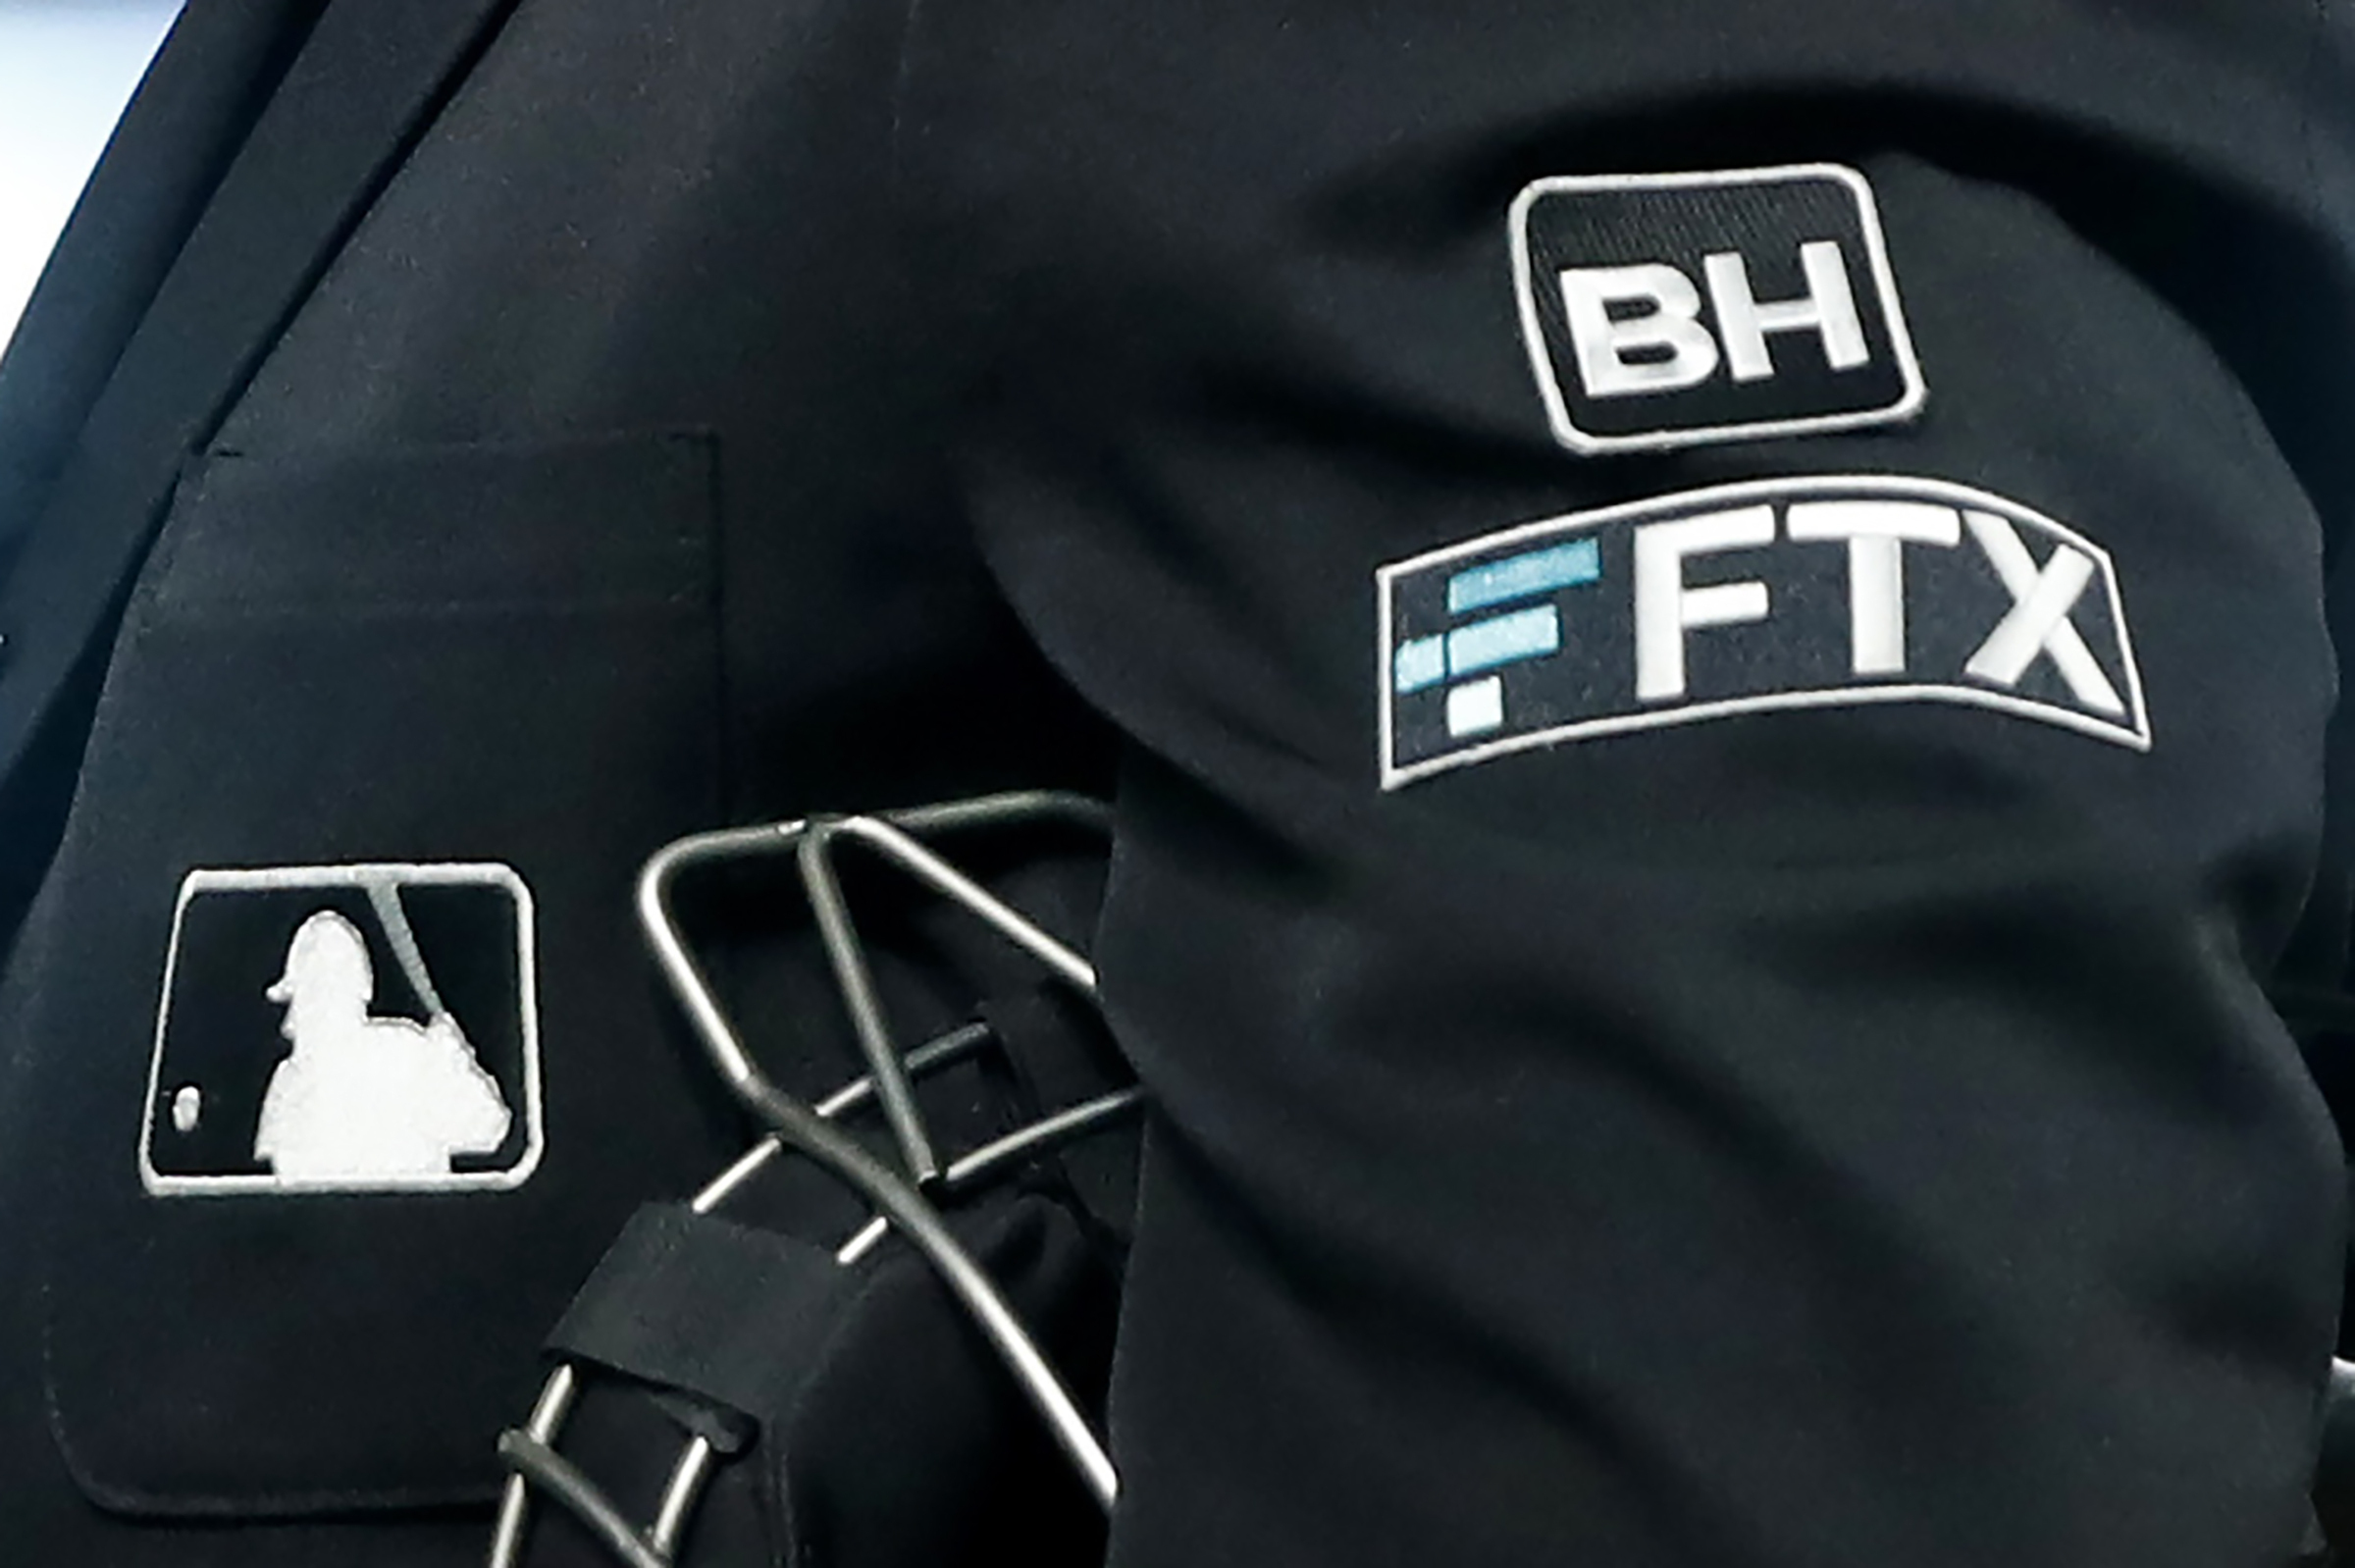 umpire ftx patch